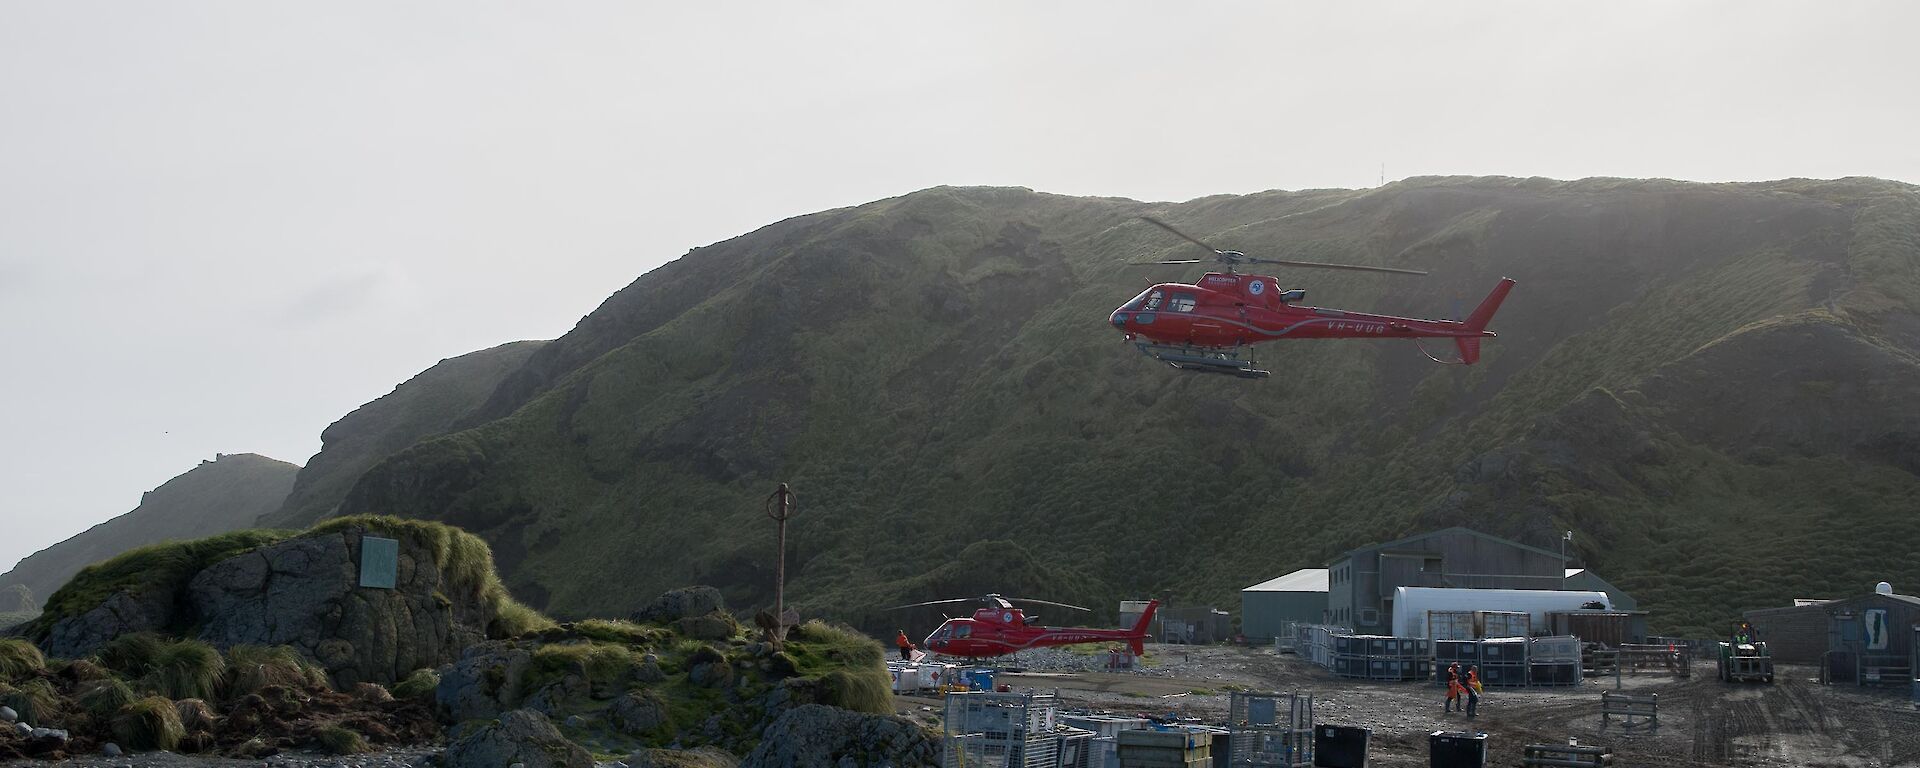 Two helicopters in flight over the station